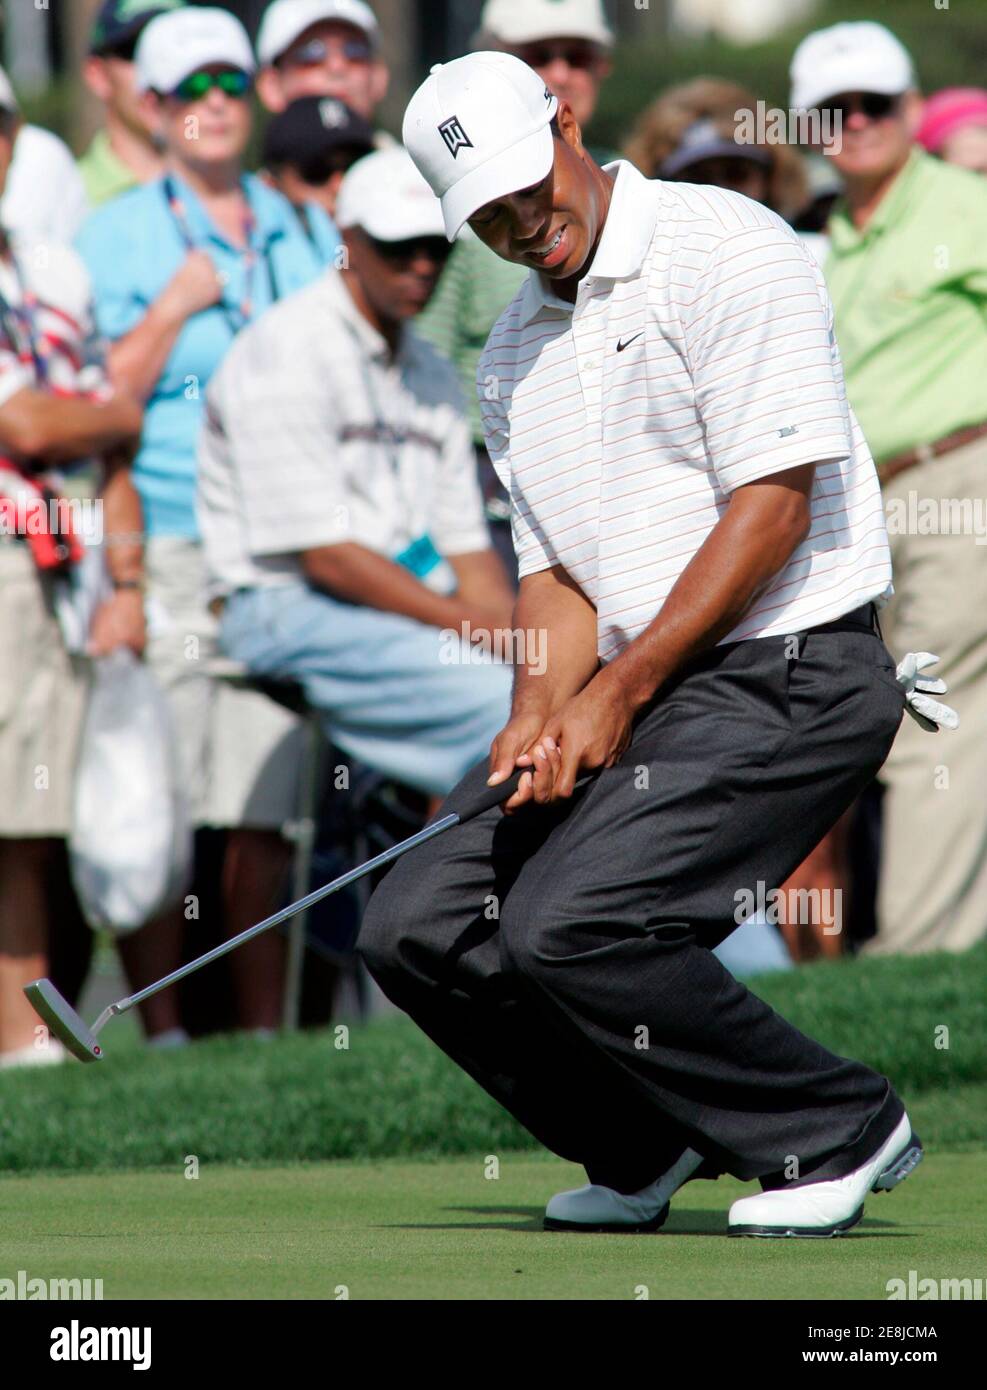 Tiger Woods reacts after missing a putt on the 16th hole during the first round of the Arnold Palmer Invitational golf tournament held at the Bay Hill Club in Orlando, Florida March 15, 2007. REUTERS/Rick Fowler (UNITED STATES) Stock Photo